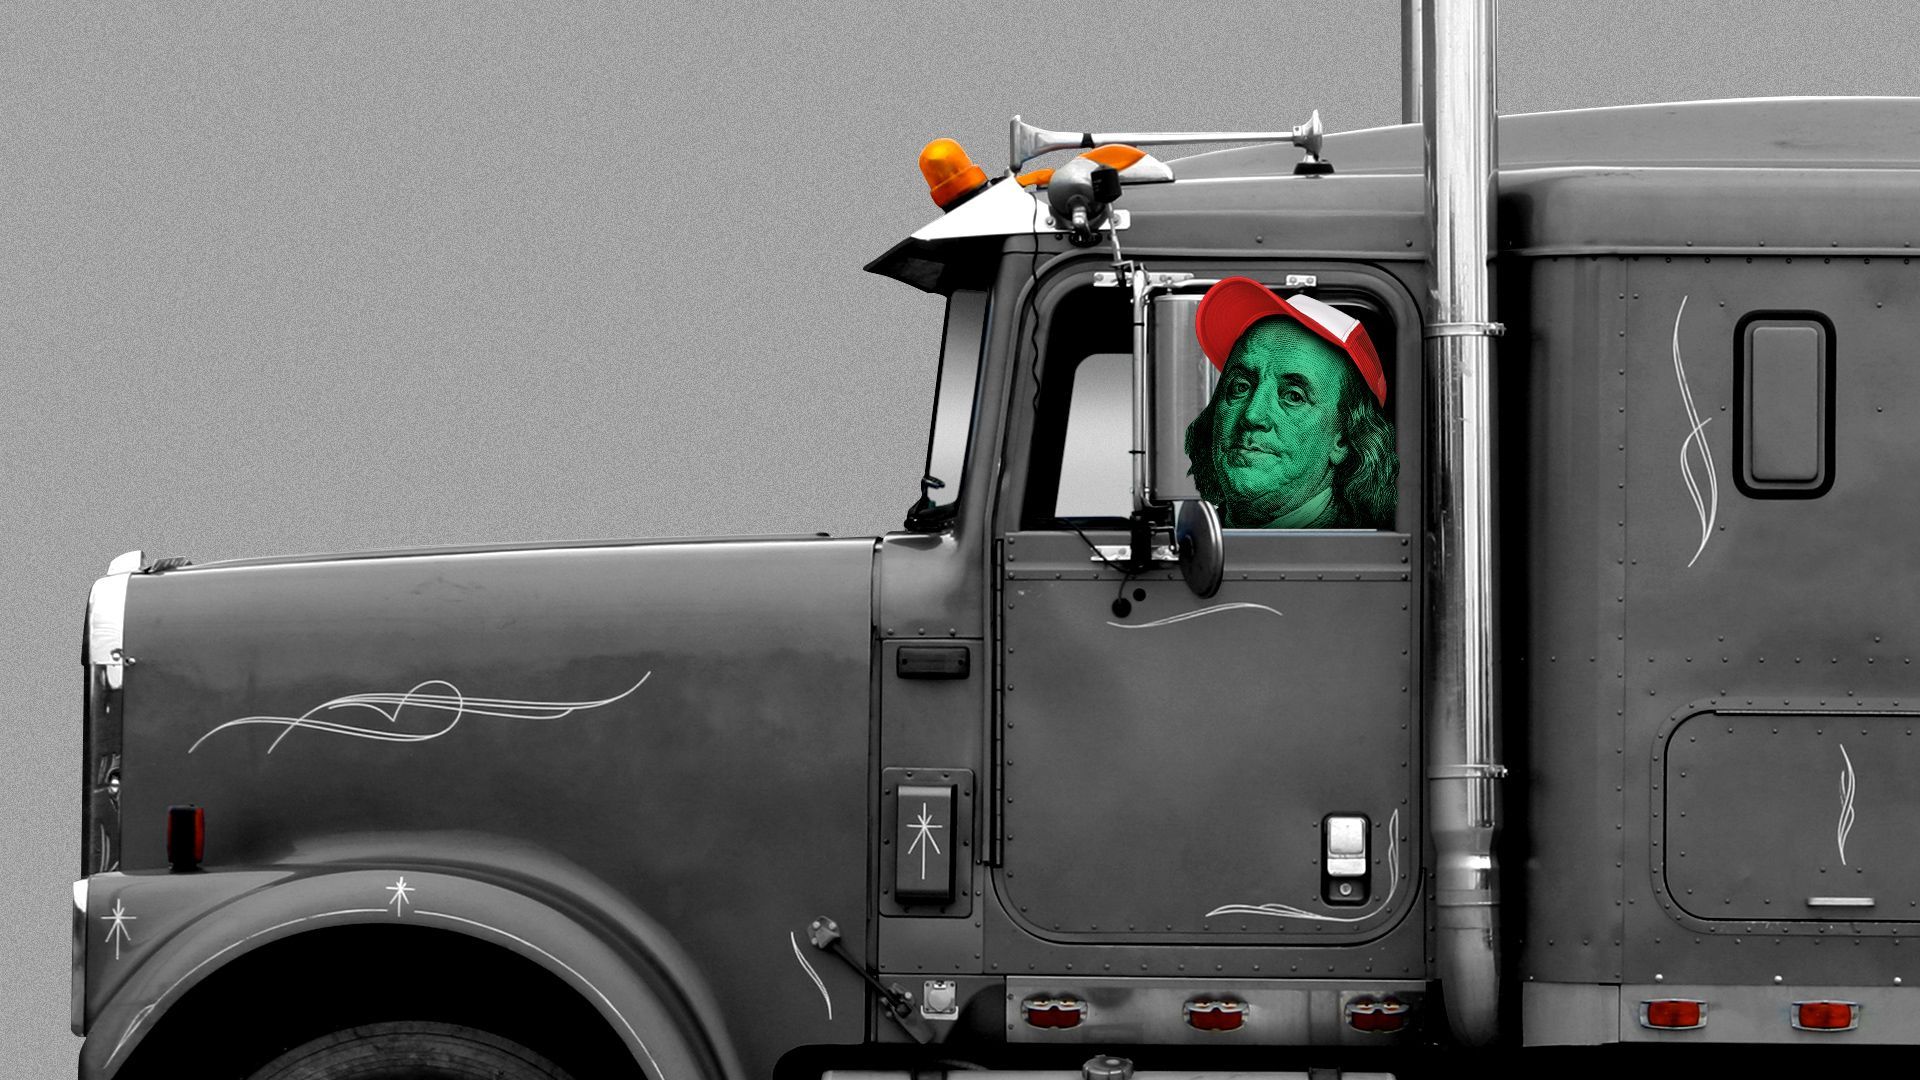 Illustration of Benjamin Franklin wearing a trucker hat and driving a semi truck. 